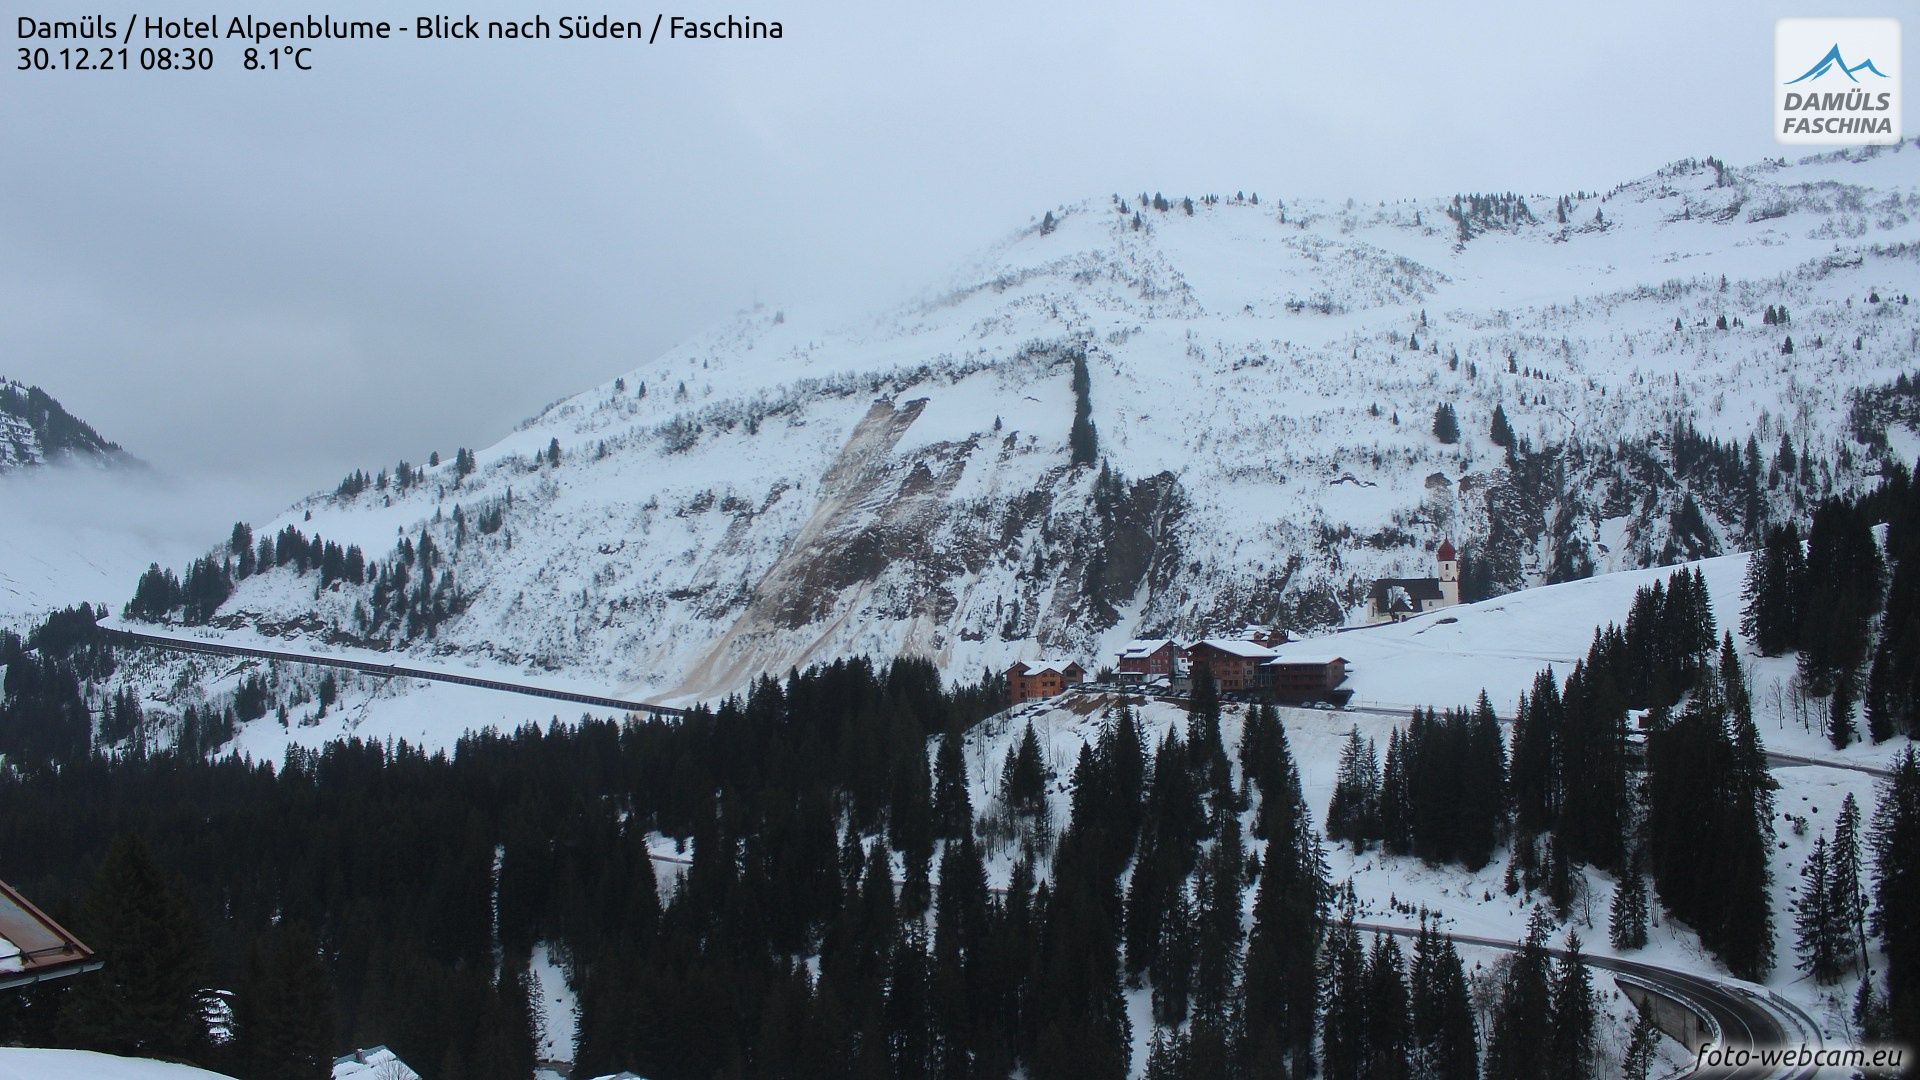 Glide cracks and wet snow avalanches in Damüls due to the rain of yesterday (foto-webcam.eu)